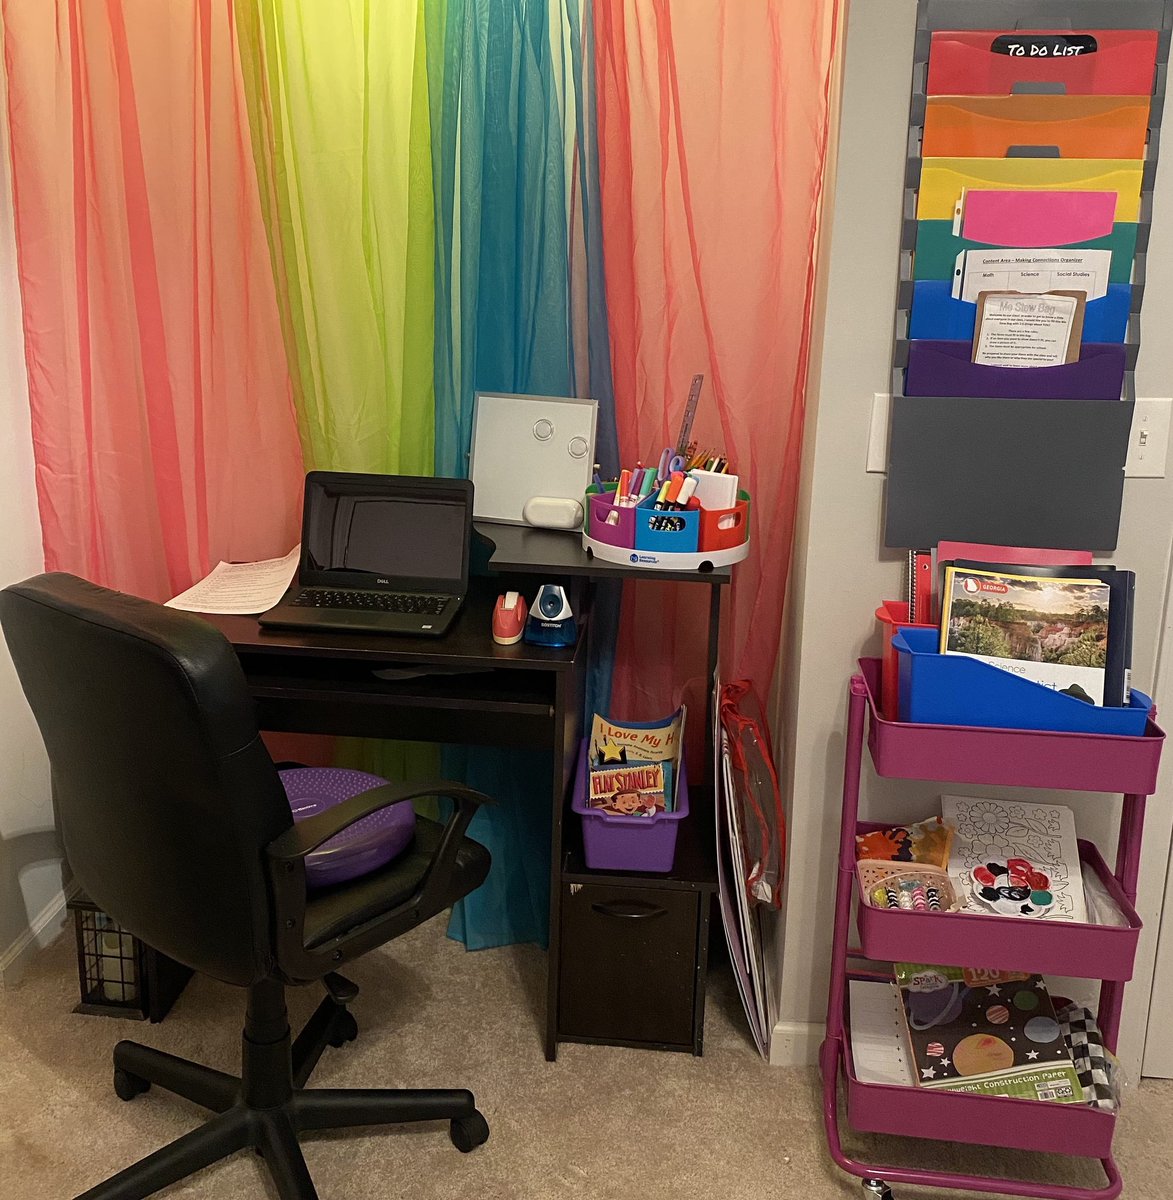 #Parents do you need tips for creating a designated study space in your home for your kids? Then join us & our guest Ms. Danielle Boyd on Saturday 9/26 at 2:30 pm EST for our #STEMport program's virtual #KupcakesandKonvos …akesandkonvosstudyarea.eventbrite.com #ParentingTips